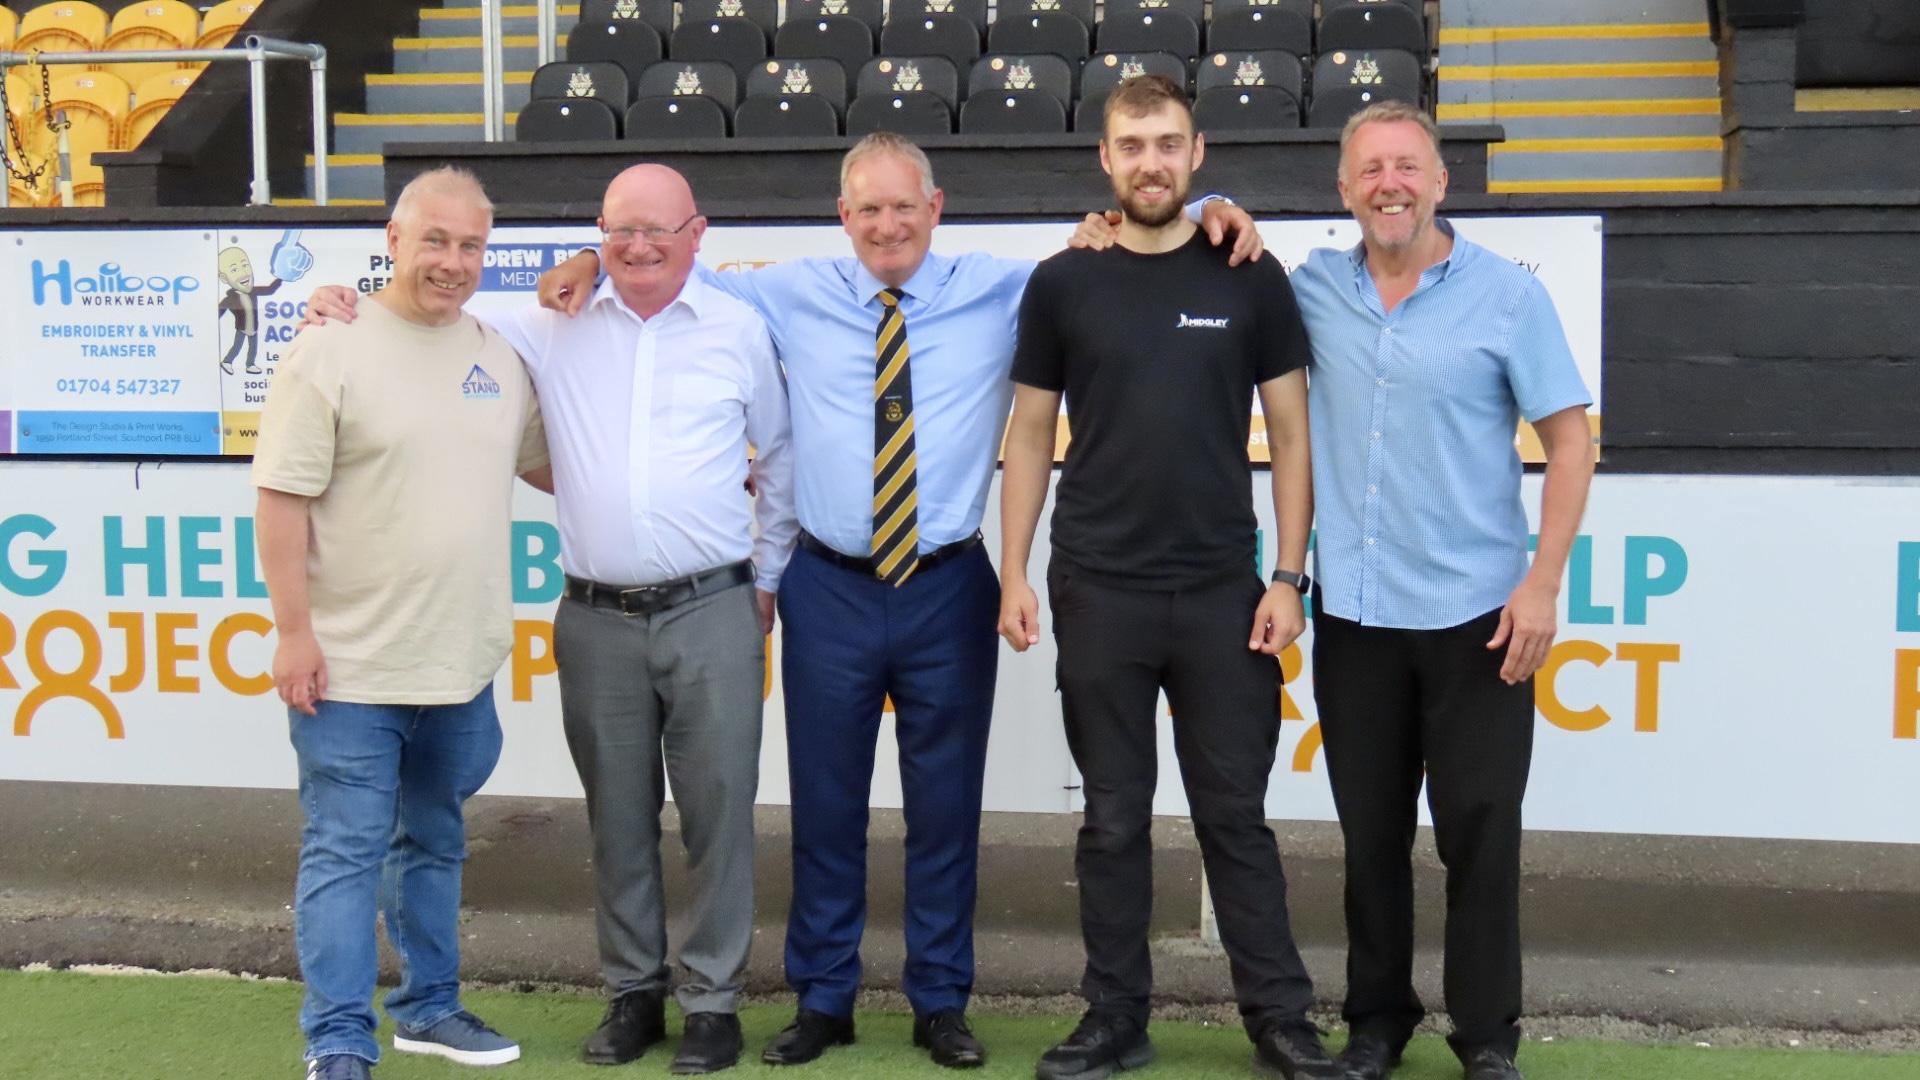 Guests enjoy the first Sandgrounders Business Club at Southport Football Club. Event organisers (from left): Andrew Brown, Chris Harding, Steve Dewsnip, Aaron Midgley and Mike Black. Photo by Andrew Brown Stand Up For Southport